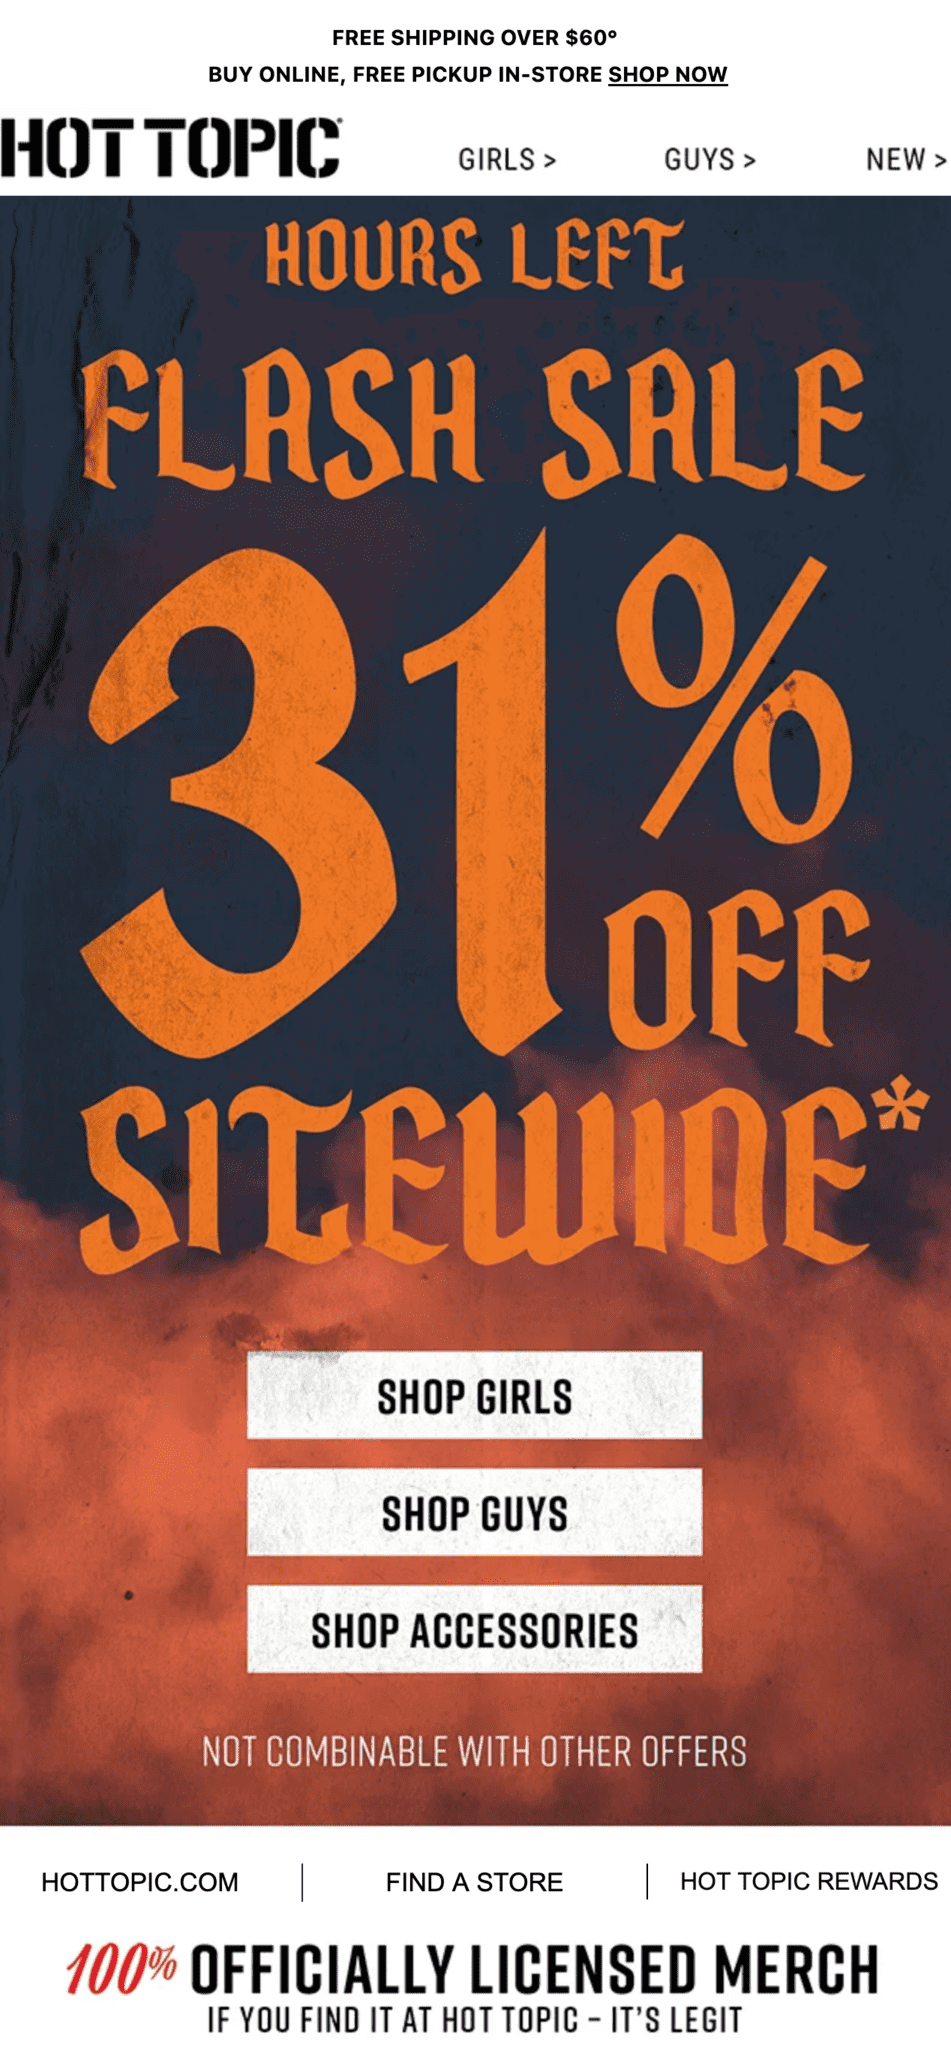 A Halloween email with a retro wavy font used for the banner